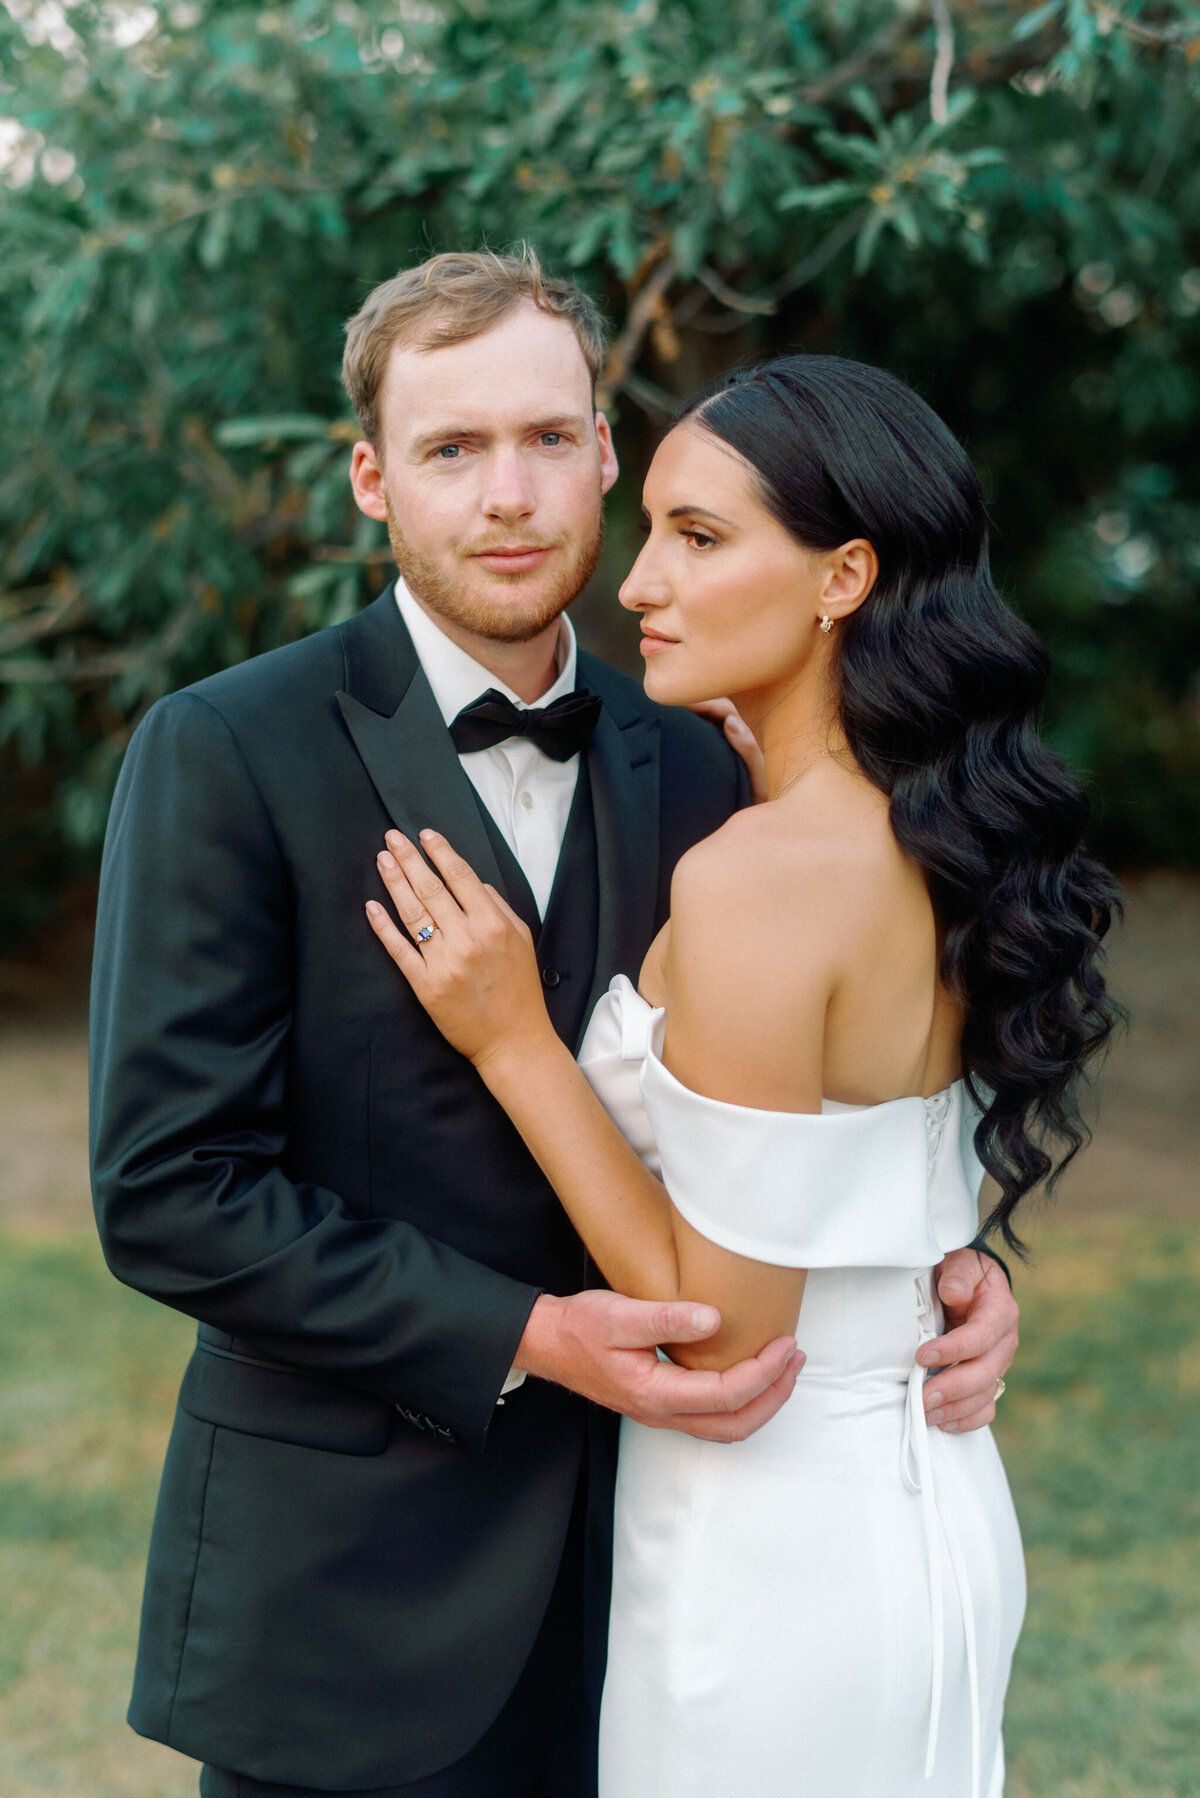 Elegant and romantic bride and groom portrait at Sparrow Lane by Kaity Body Photography, film inspired wedding photographer in Calgary, Alberta. Featured on the Bronte Bride Vendor Guide.